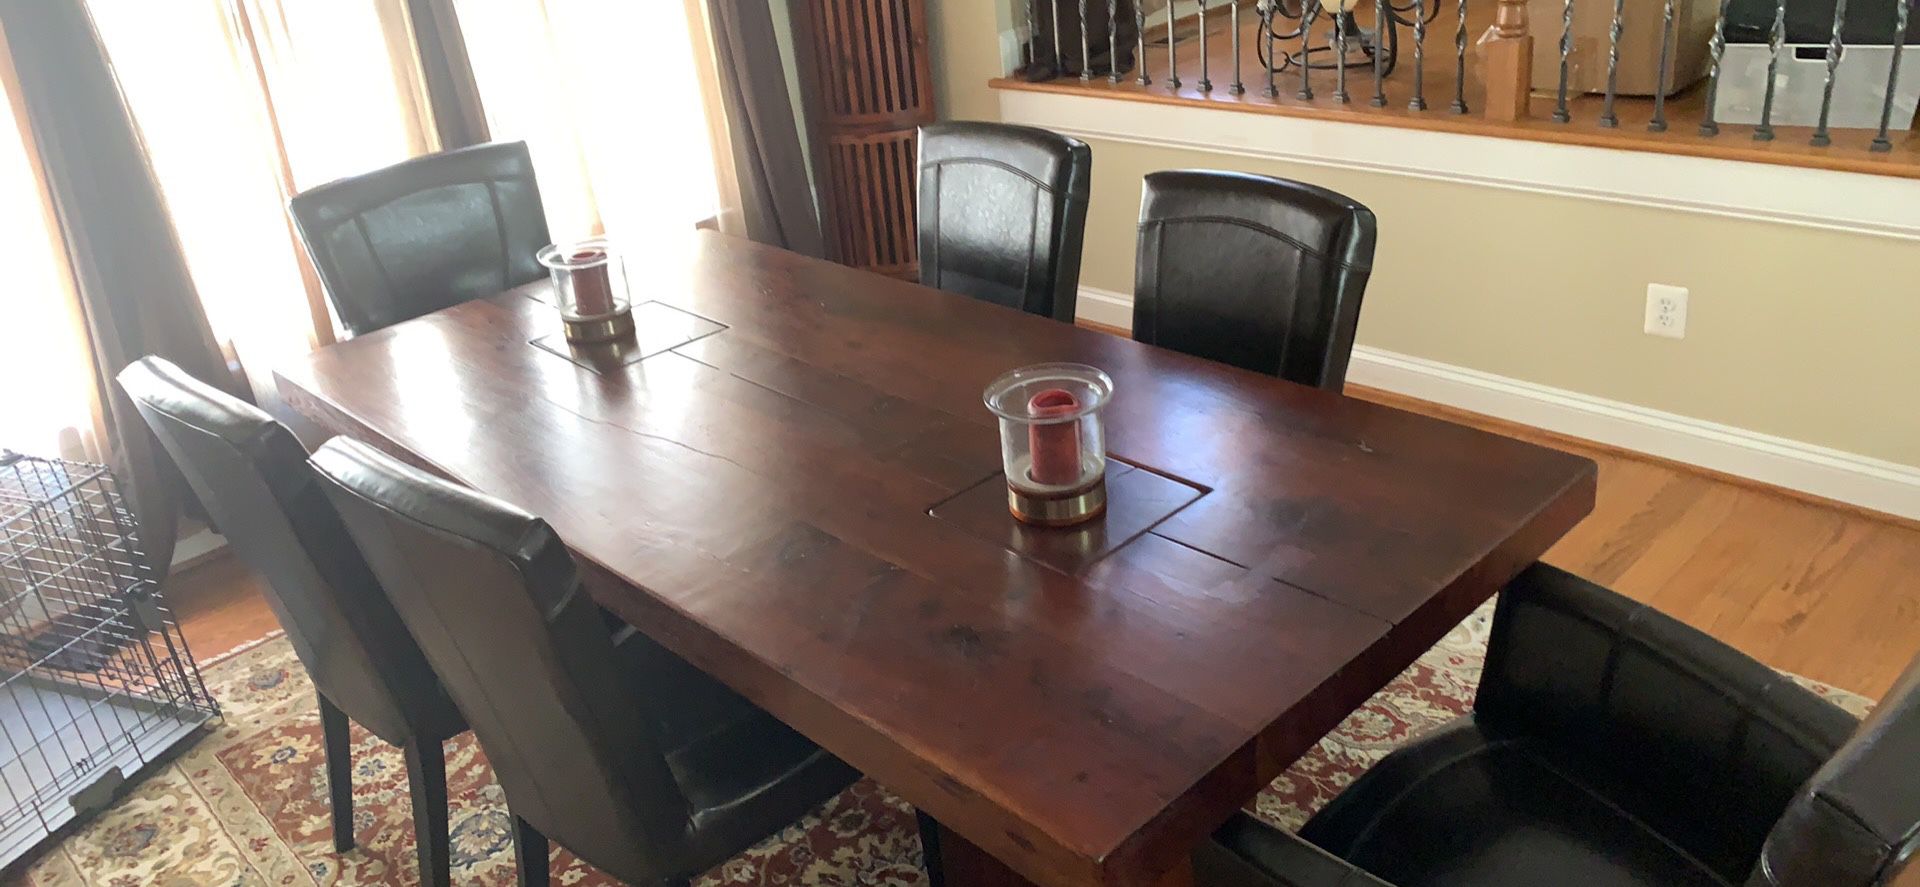 Arhaus “Tao” 84” table with 6 chairs